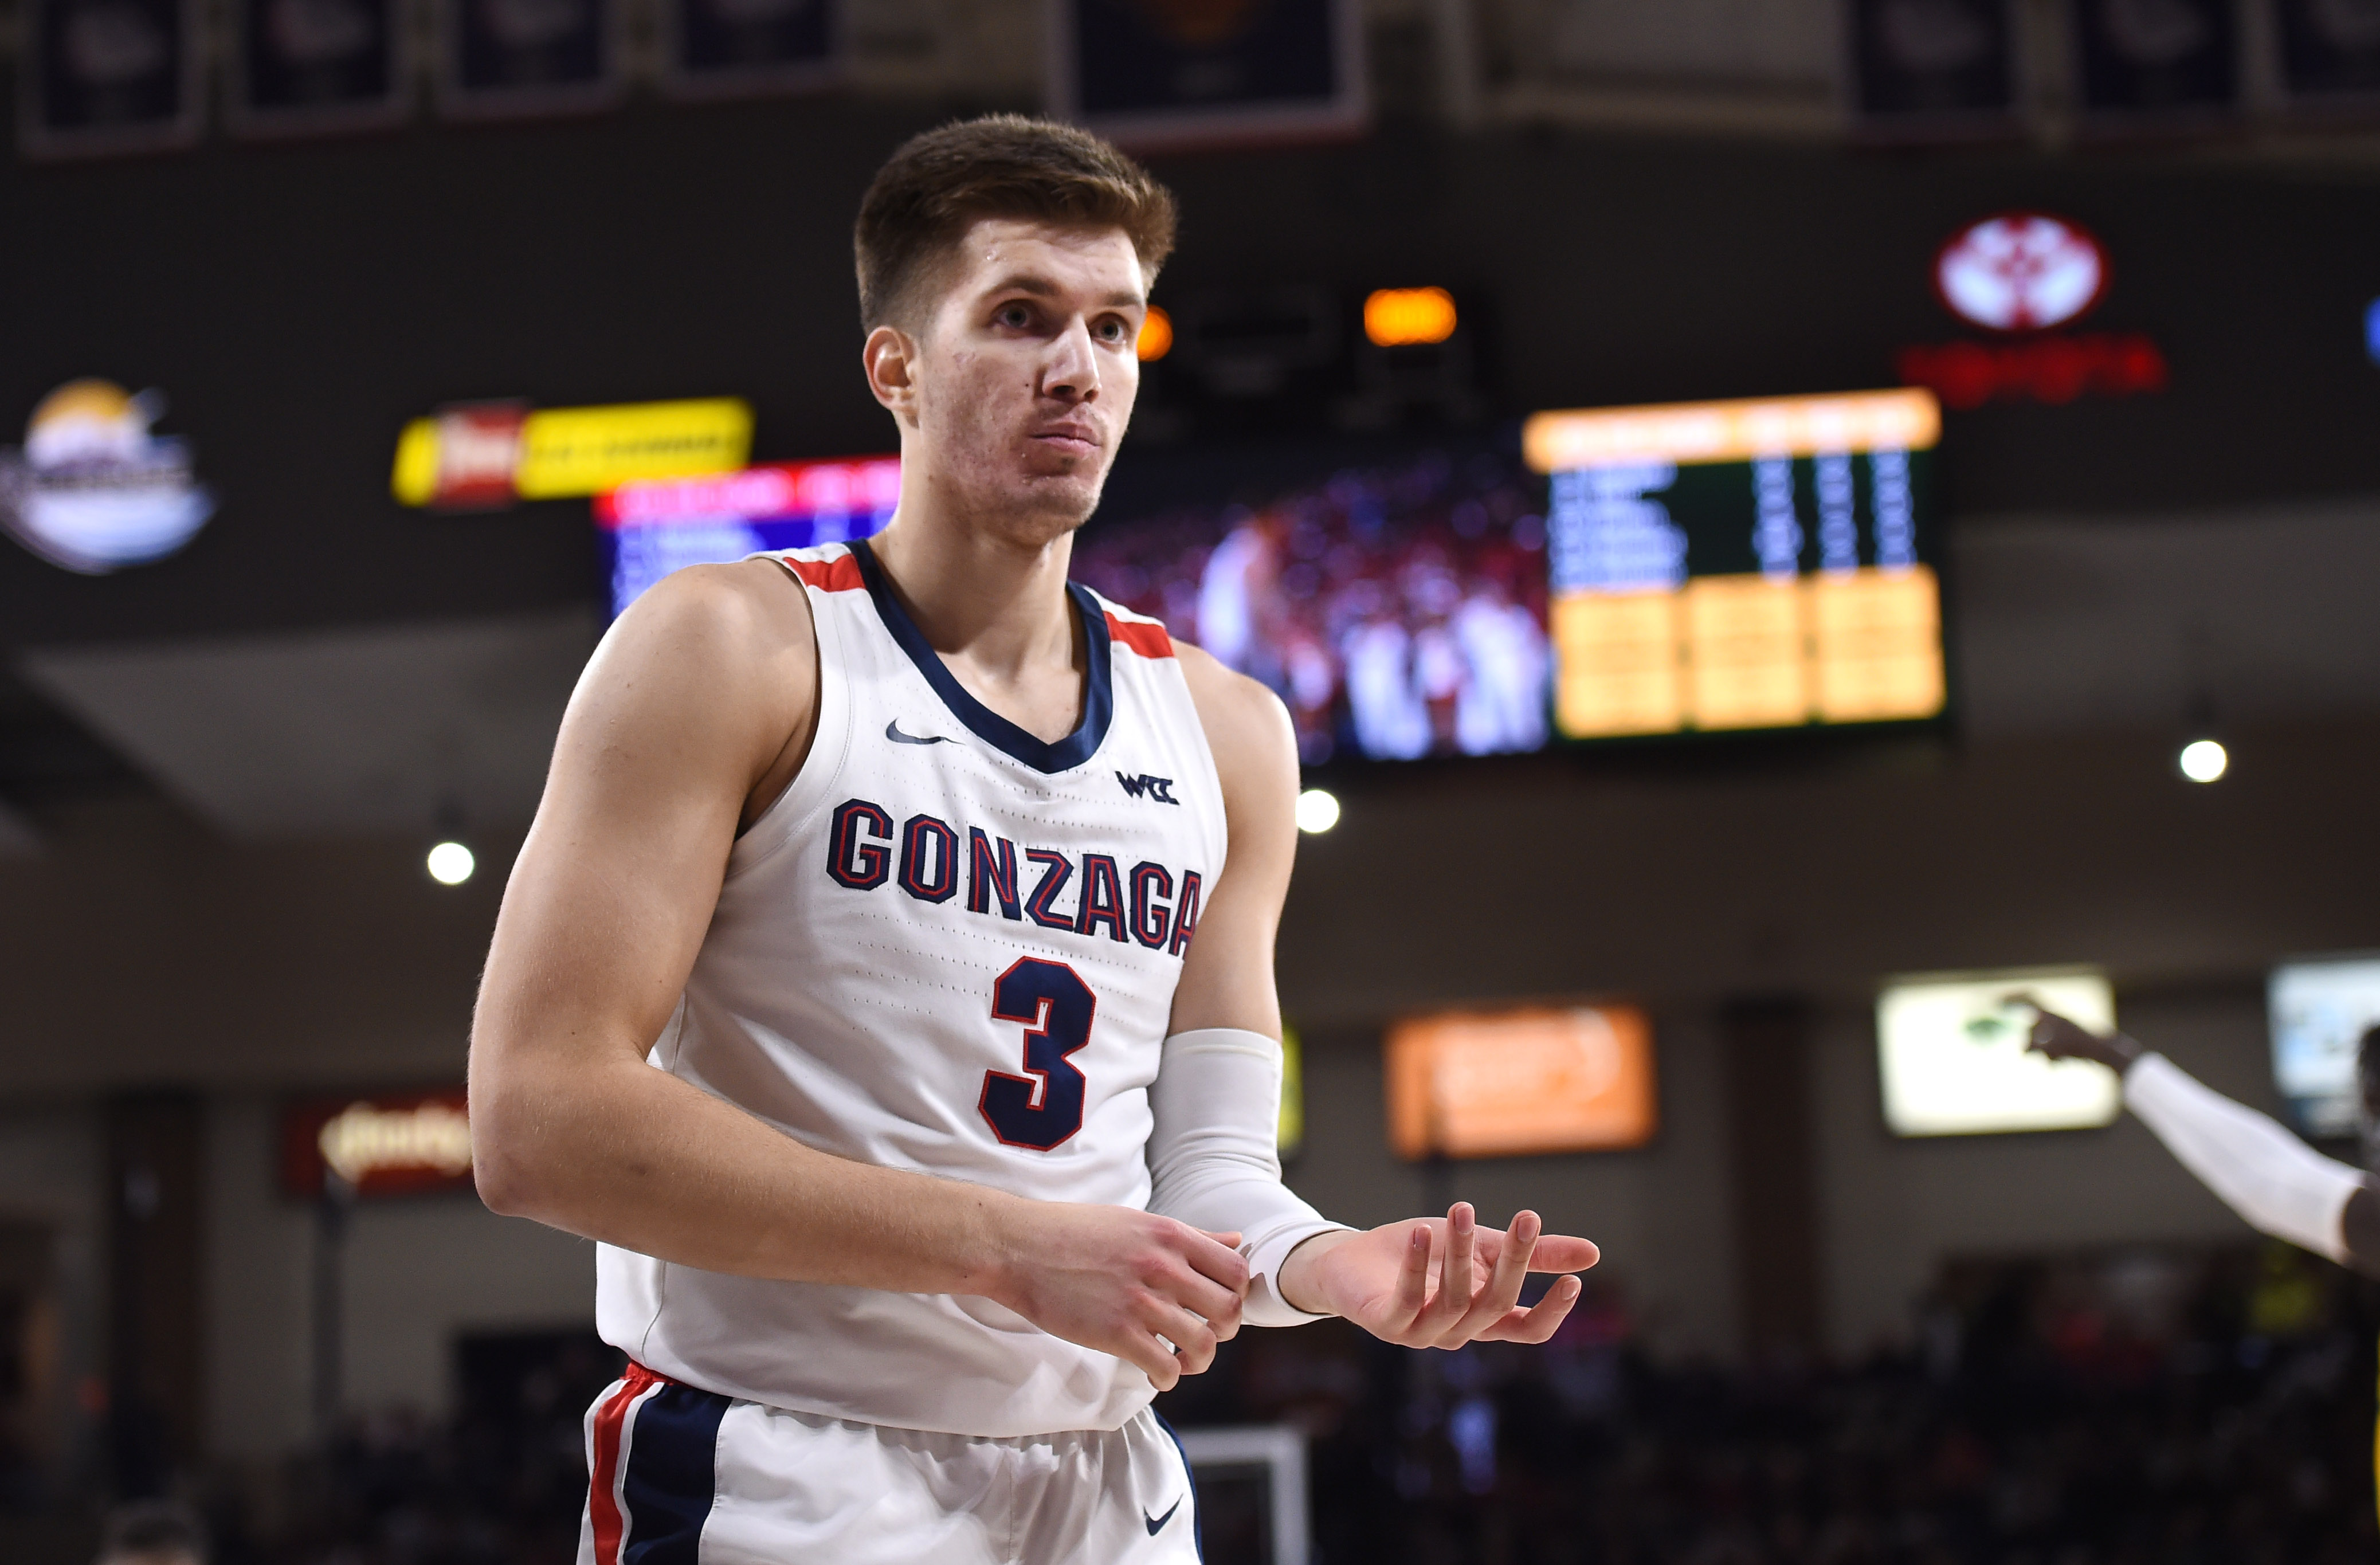 Feb 20, 2020; Spokane, Washington, USA; Gonzaga Bulldogs forward Filip Petrusev (3) reacts after a play against the San Francisco Dons in the second half at McCarthey Athletic Center. The Bulldogs won 71-54.